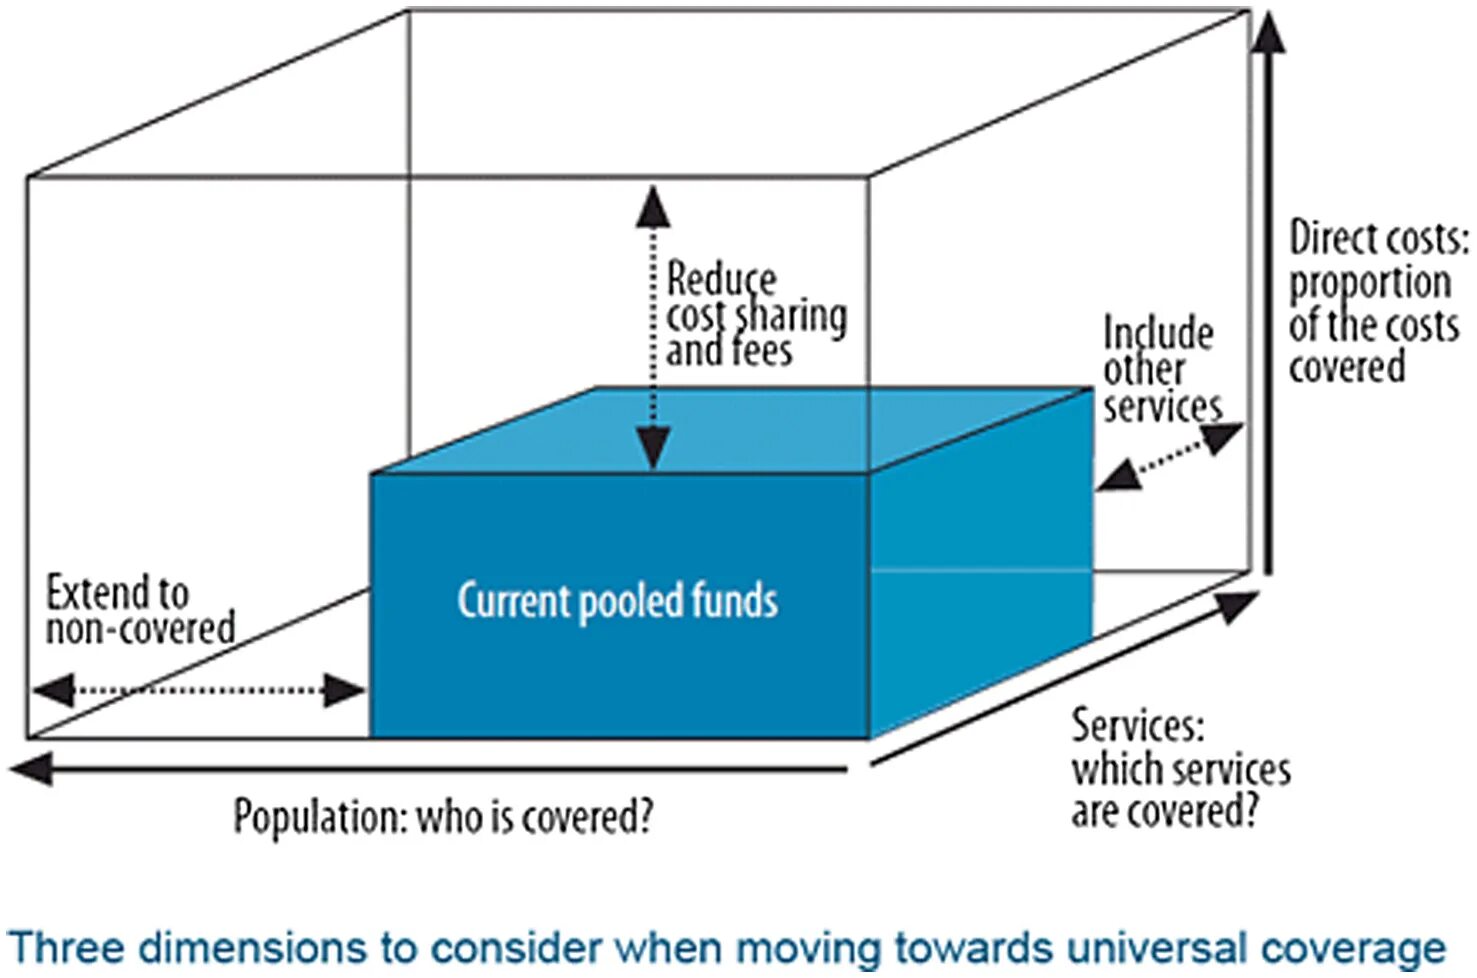 Other costs. 3 Dimensions. Universal coverage. Direct costs. Cube Pilot Dimensions.